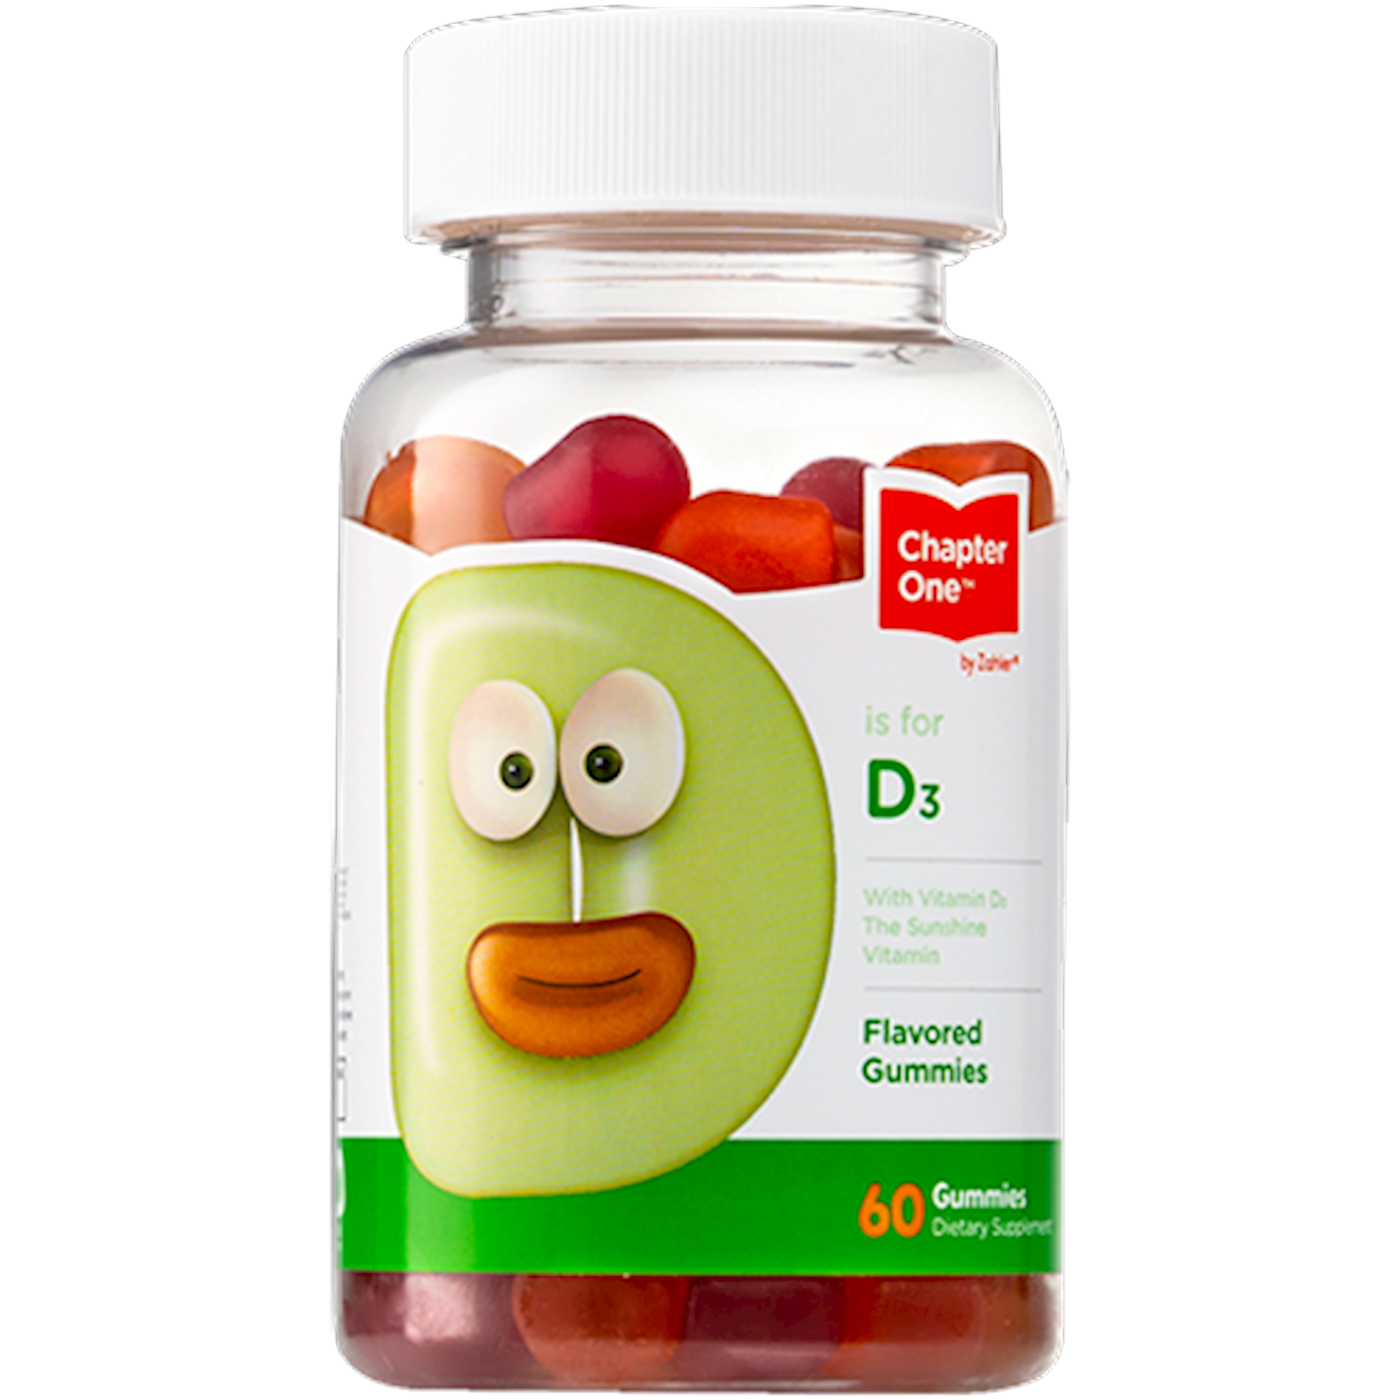 D is for D3 60 gummies Curated Wellness